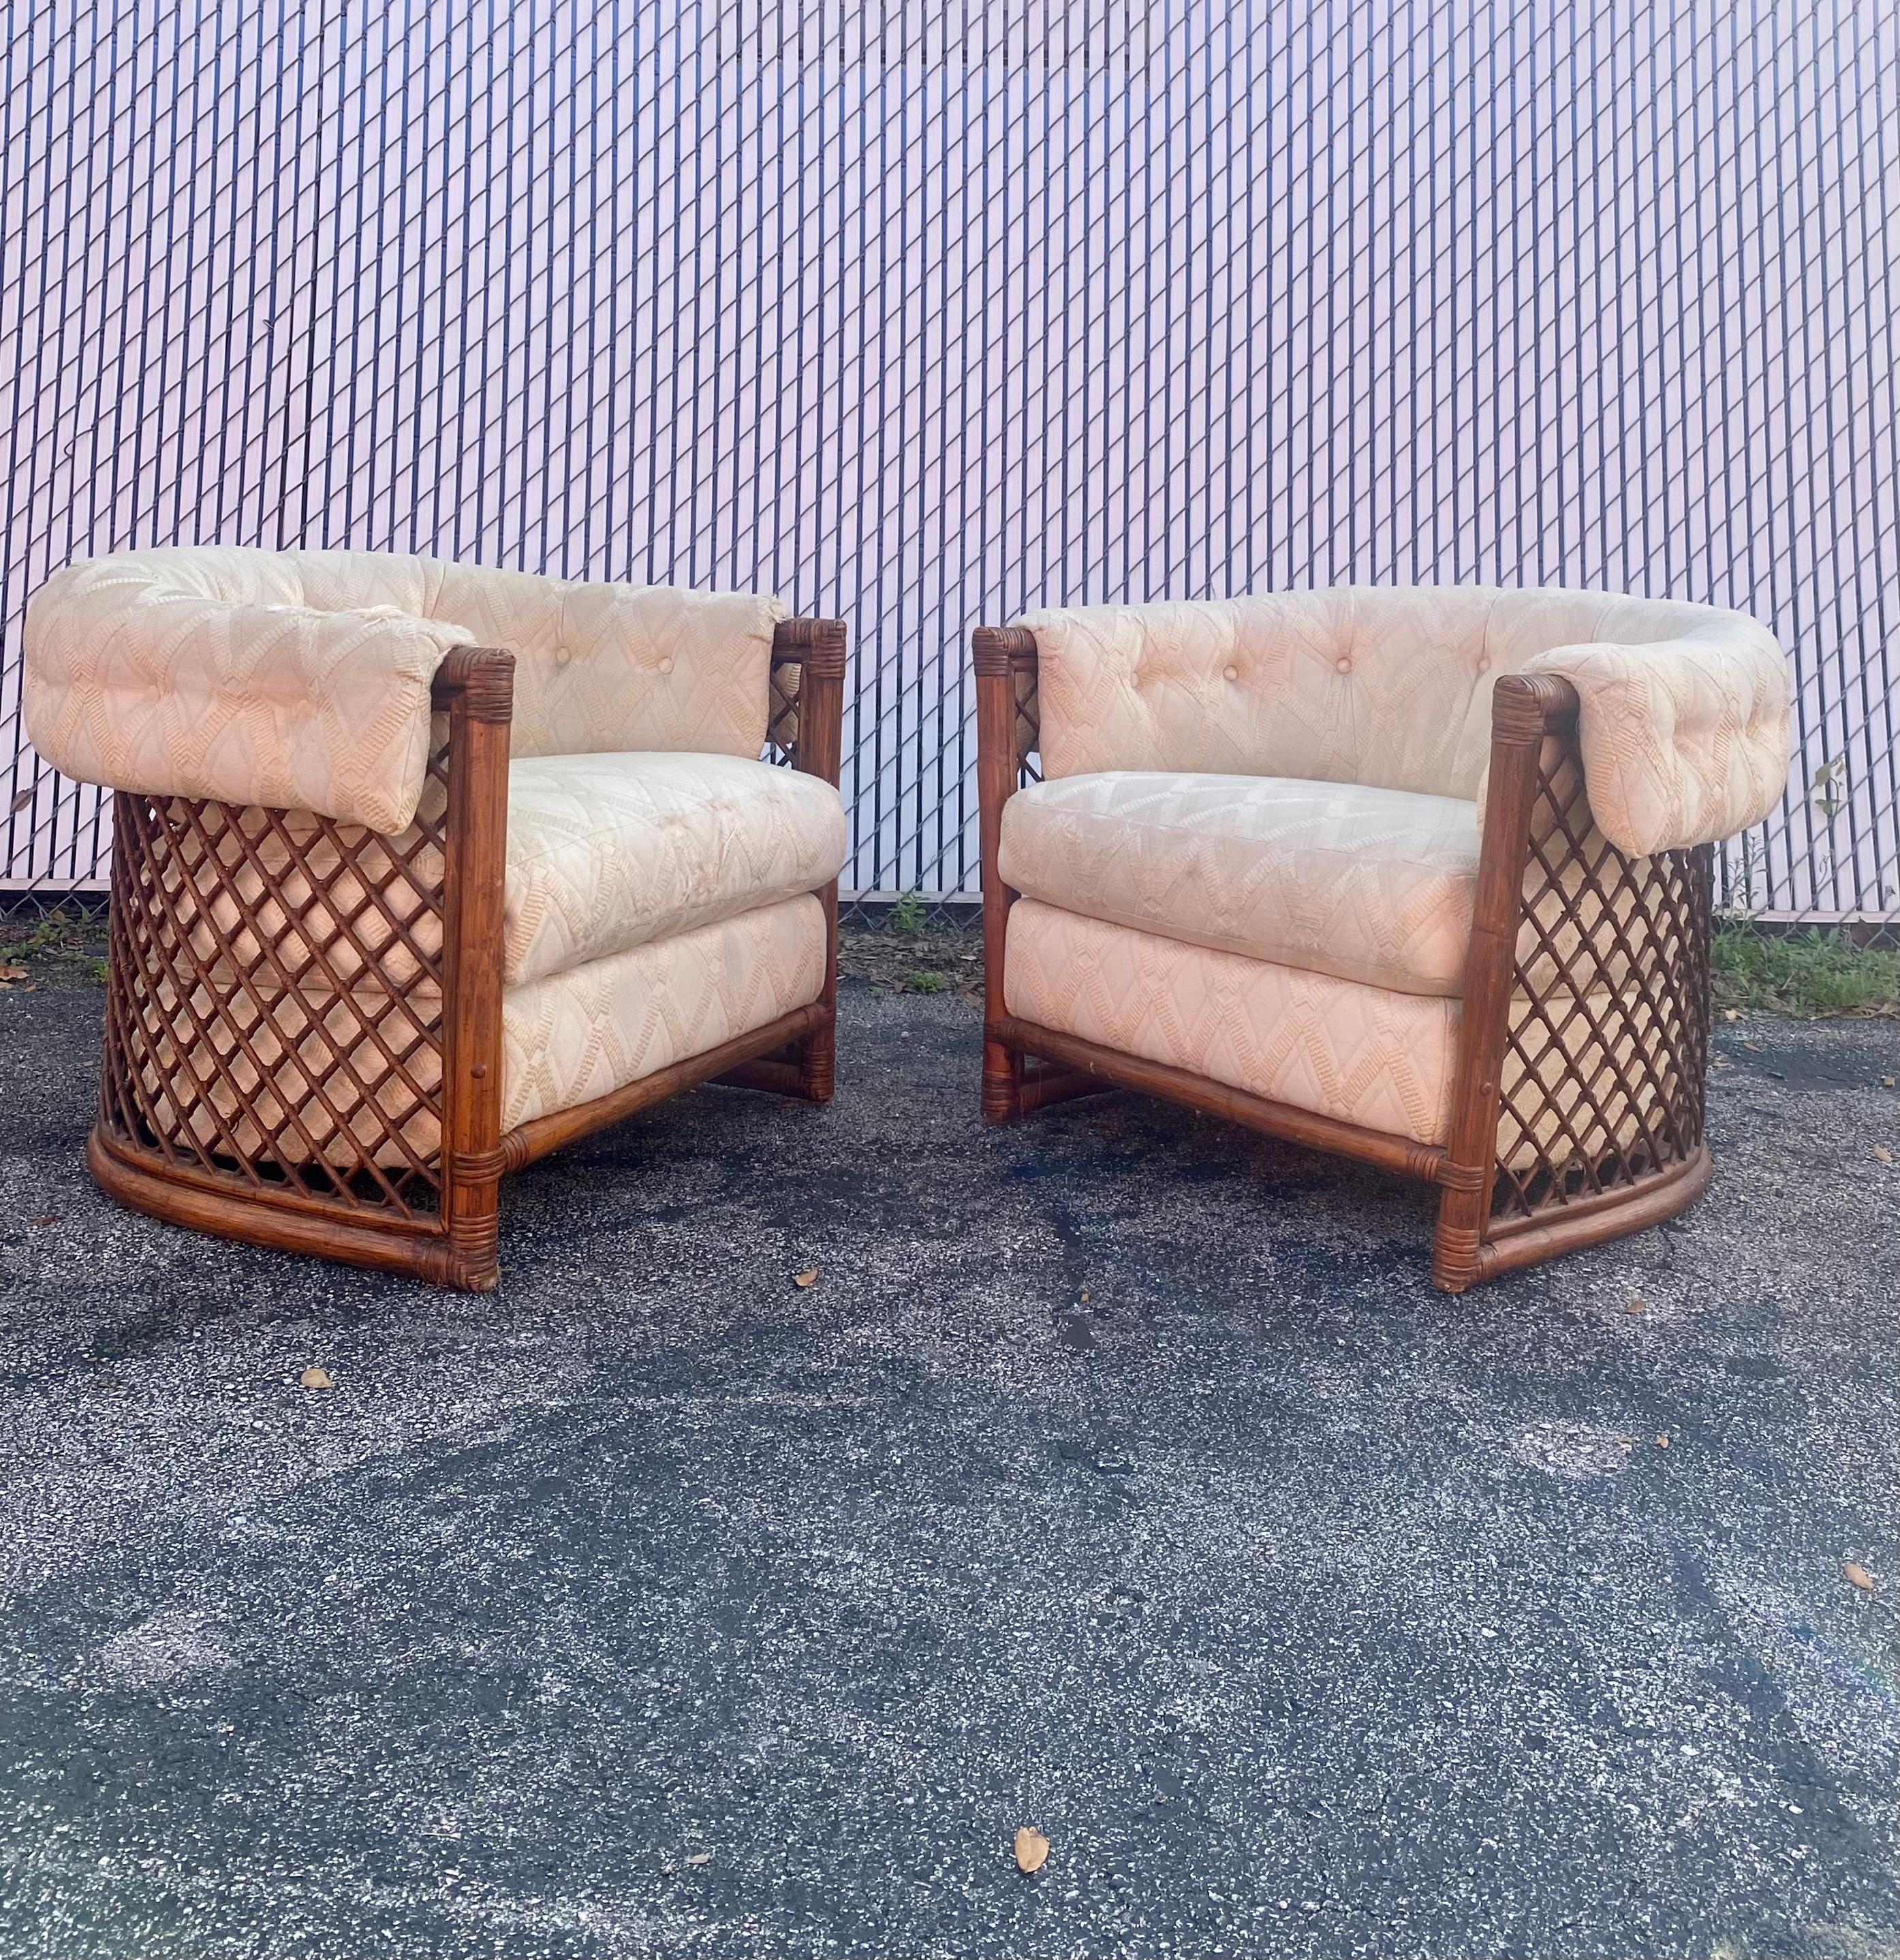 A pair of Mid Century tub barrel chairs by JD Originals. The rattan finished frames are upholstered in beige with button-tufted details on the backs and arm panels. Beneath the chair cushions, the fabric is marked ‘JD Originals’. The chairs are